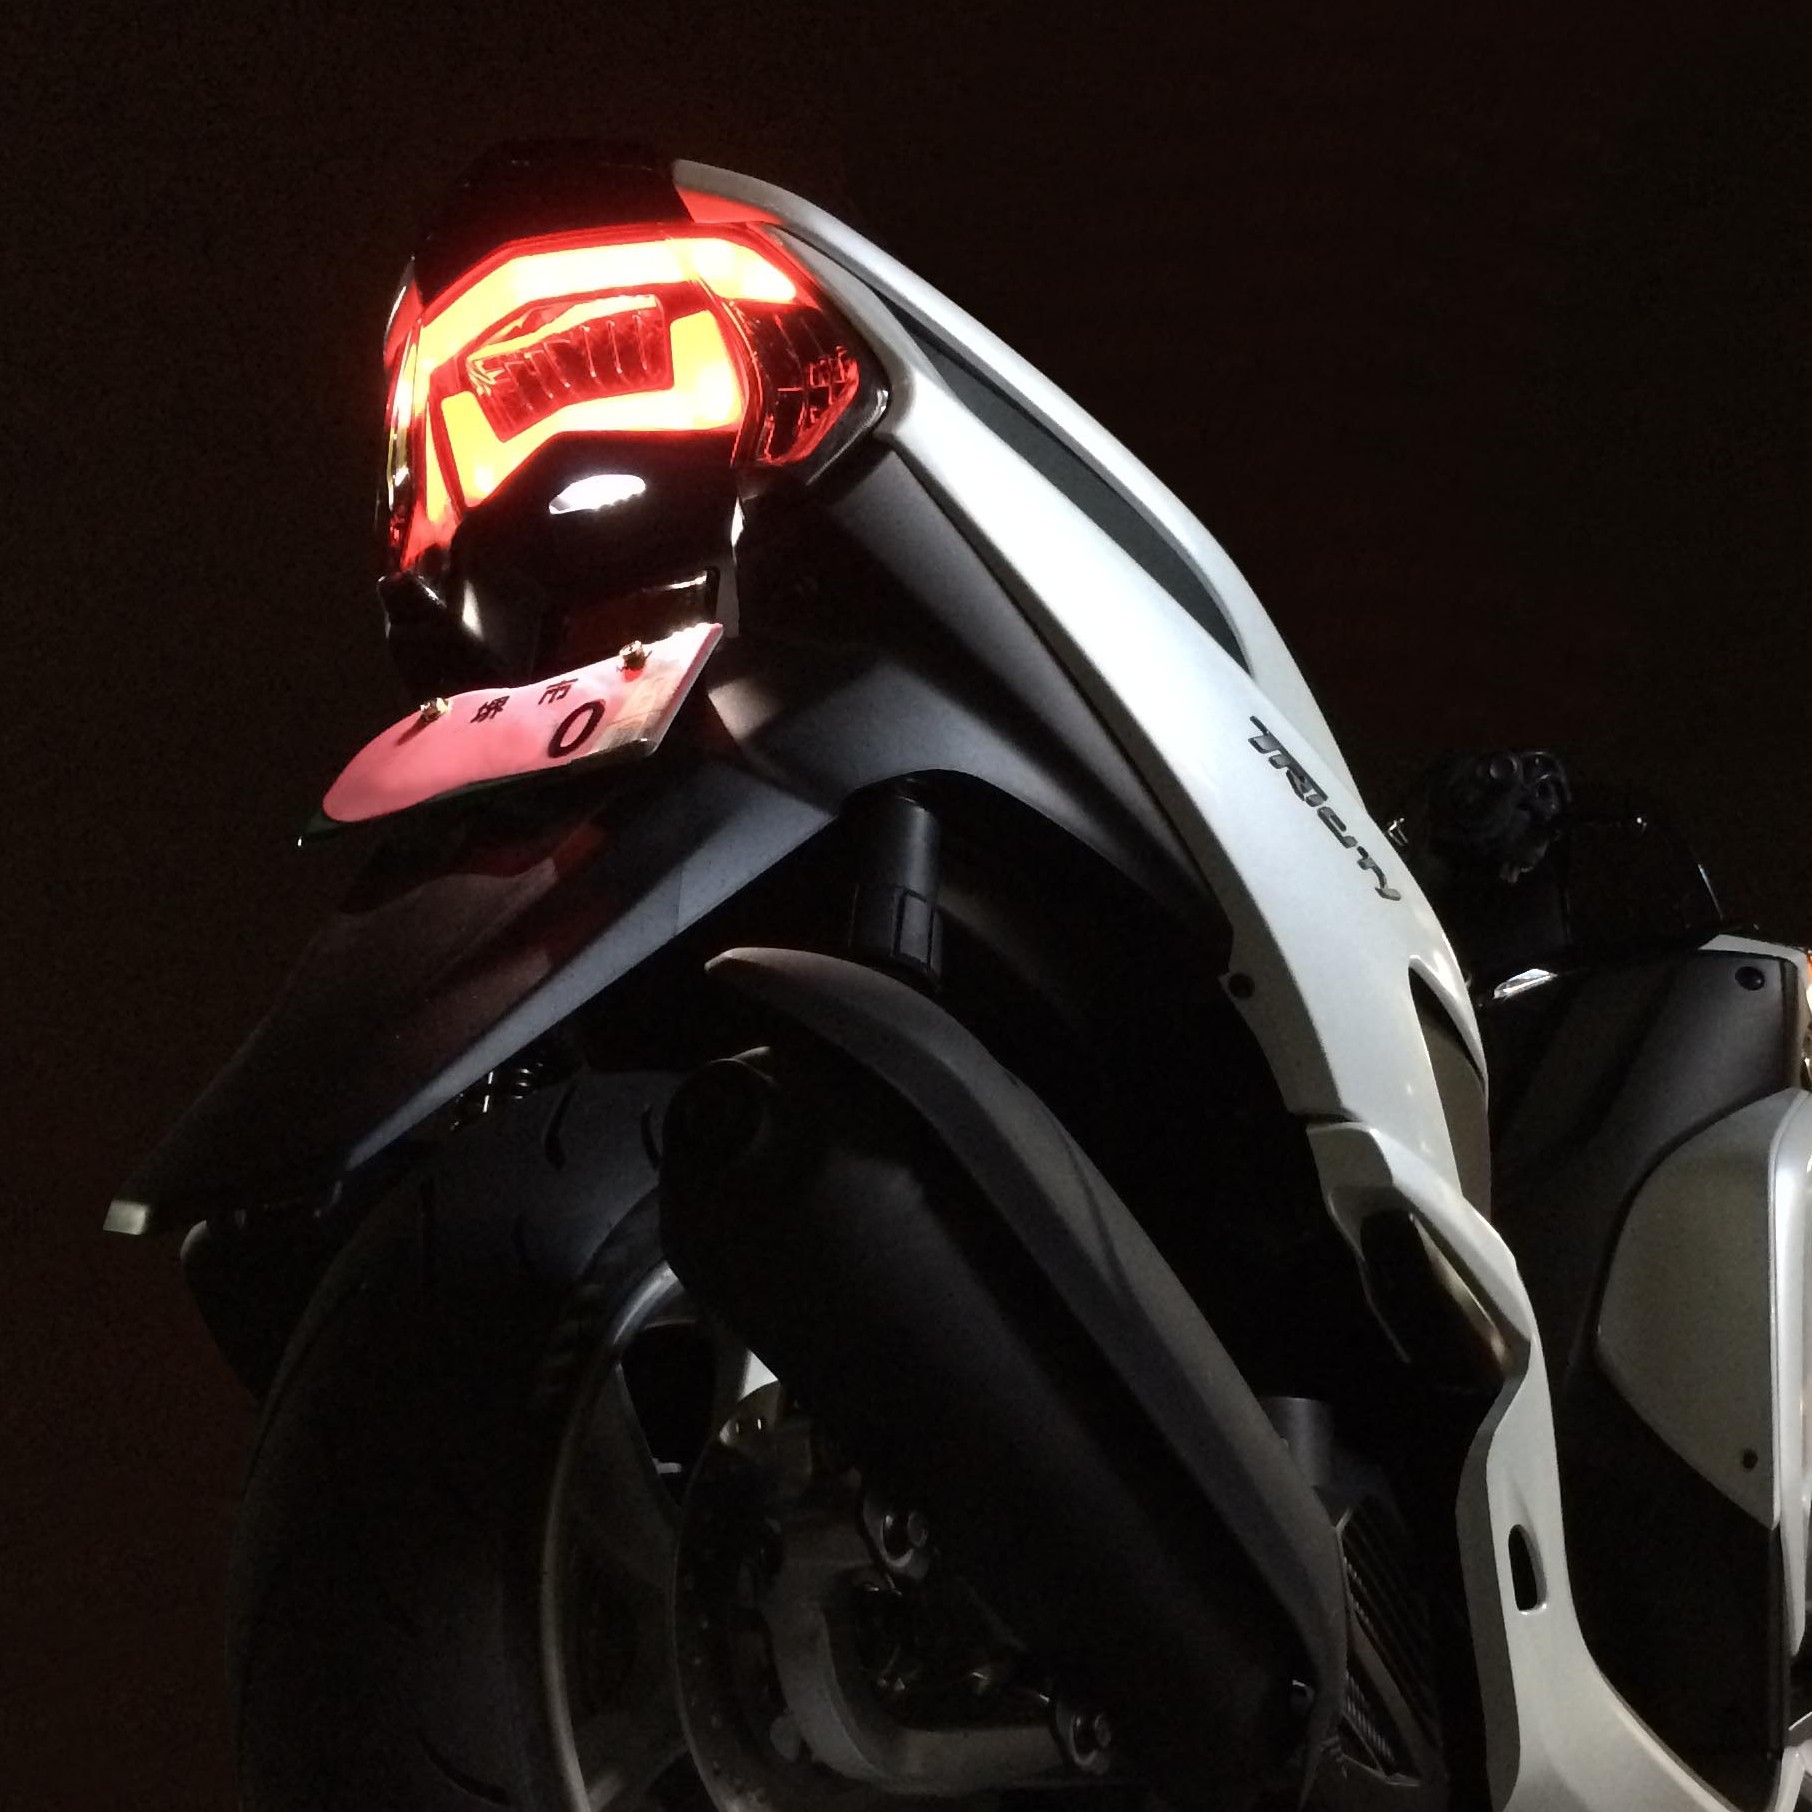 TAIL LAMP & TURN SIGNAL LENS for TRICITY - オプミッド MOTORCYCLE 